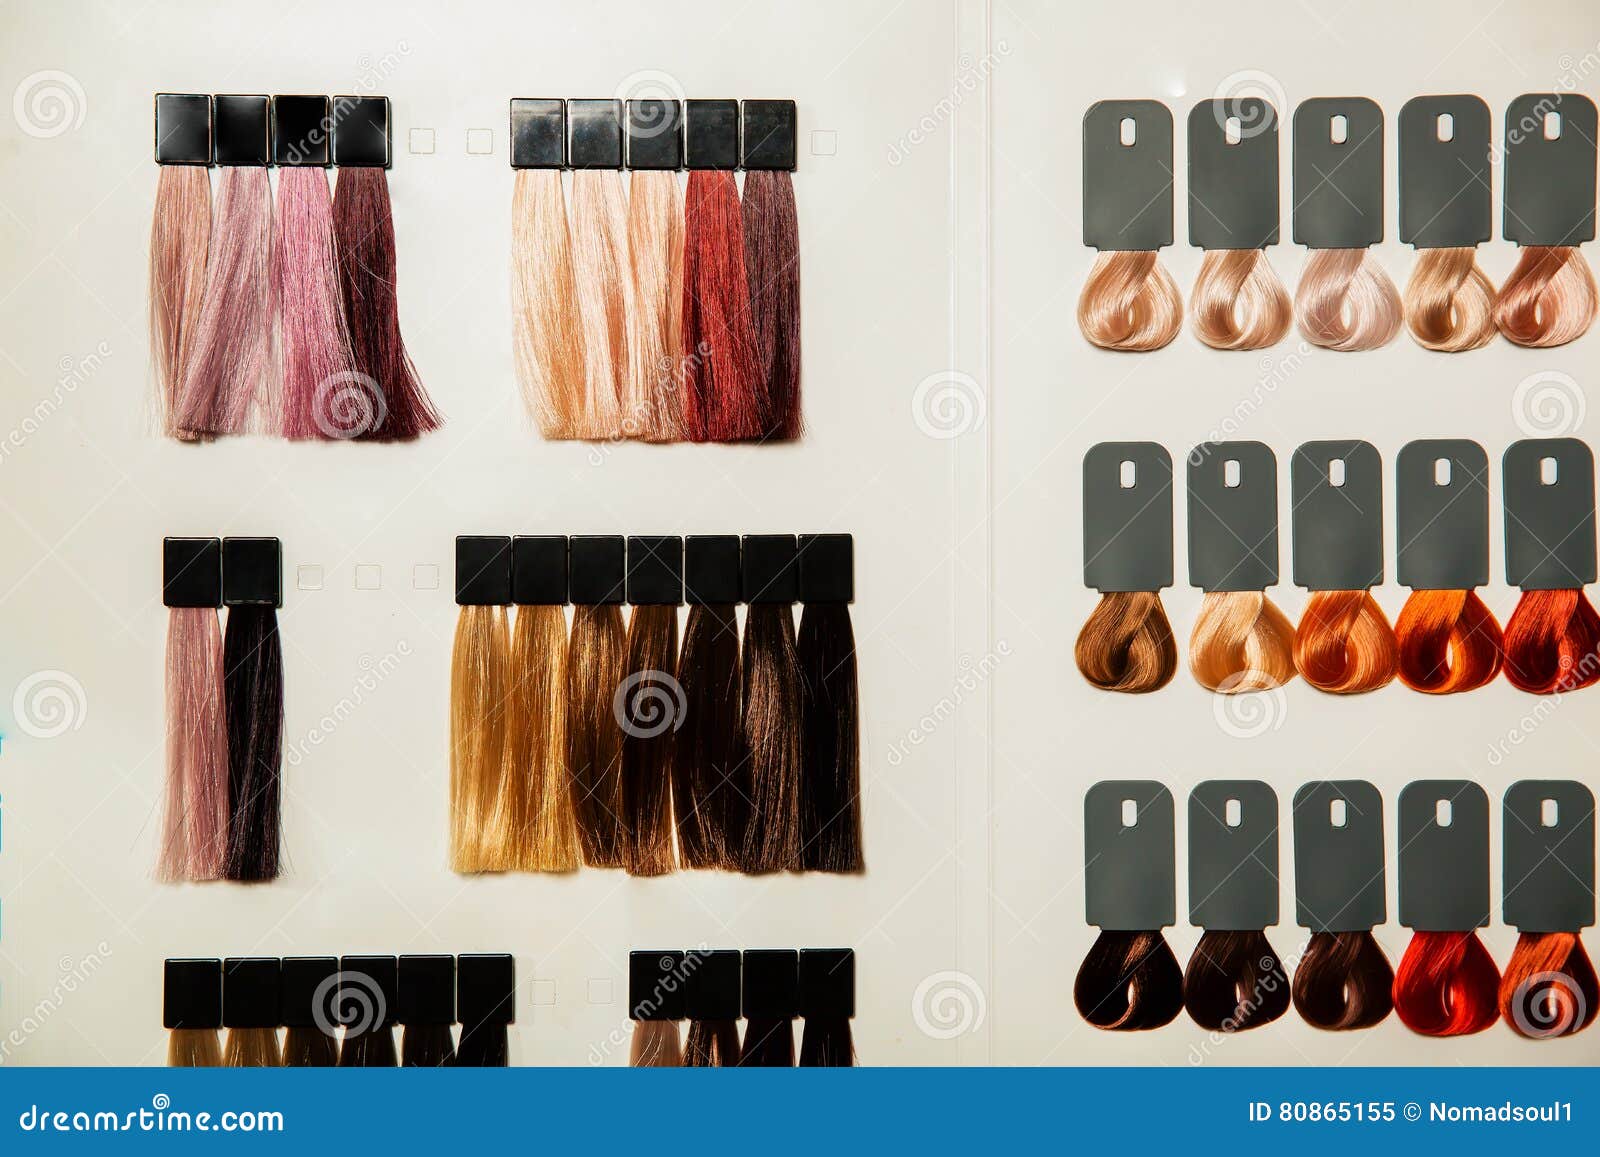 Palette Of Different Colors To Hair Dye. Stock Image - Image of fair